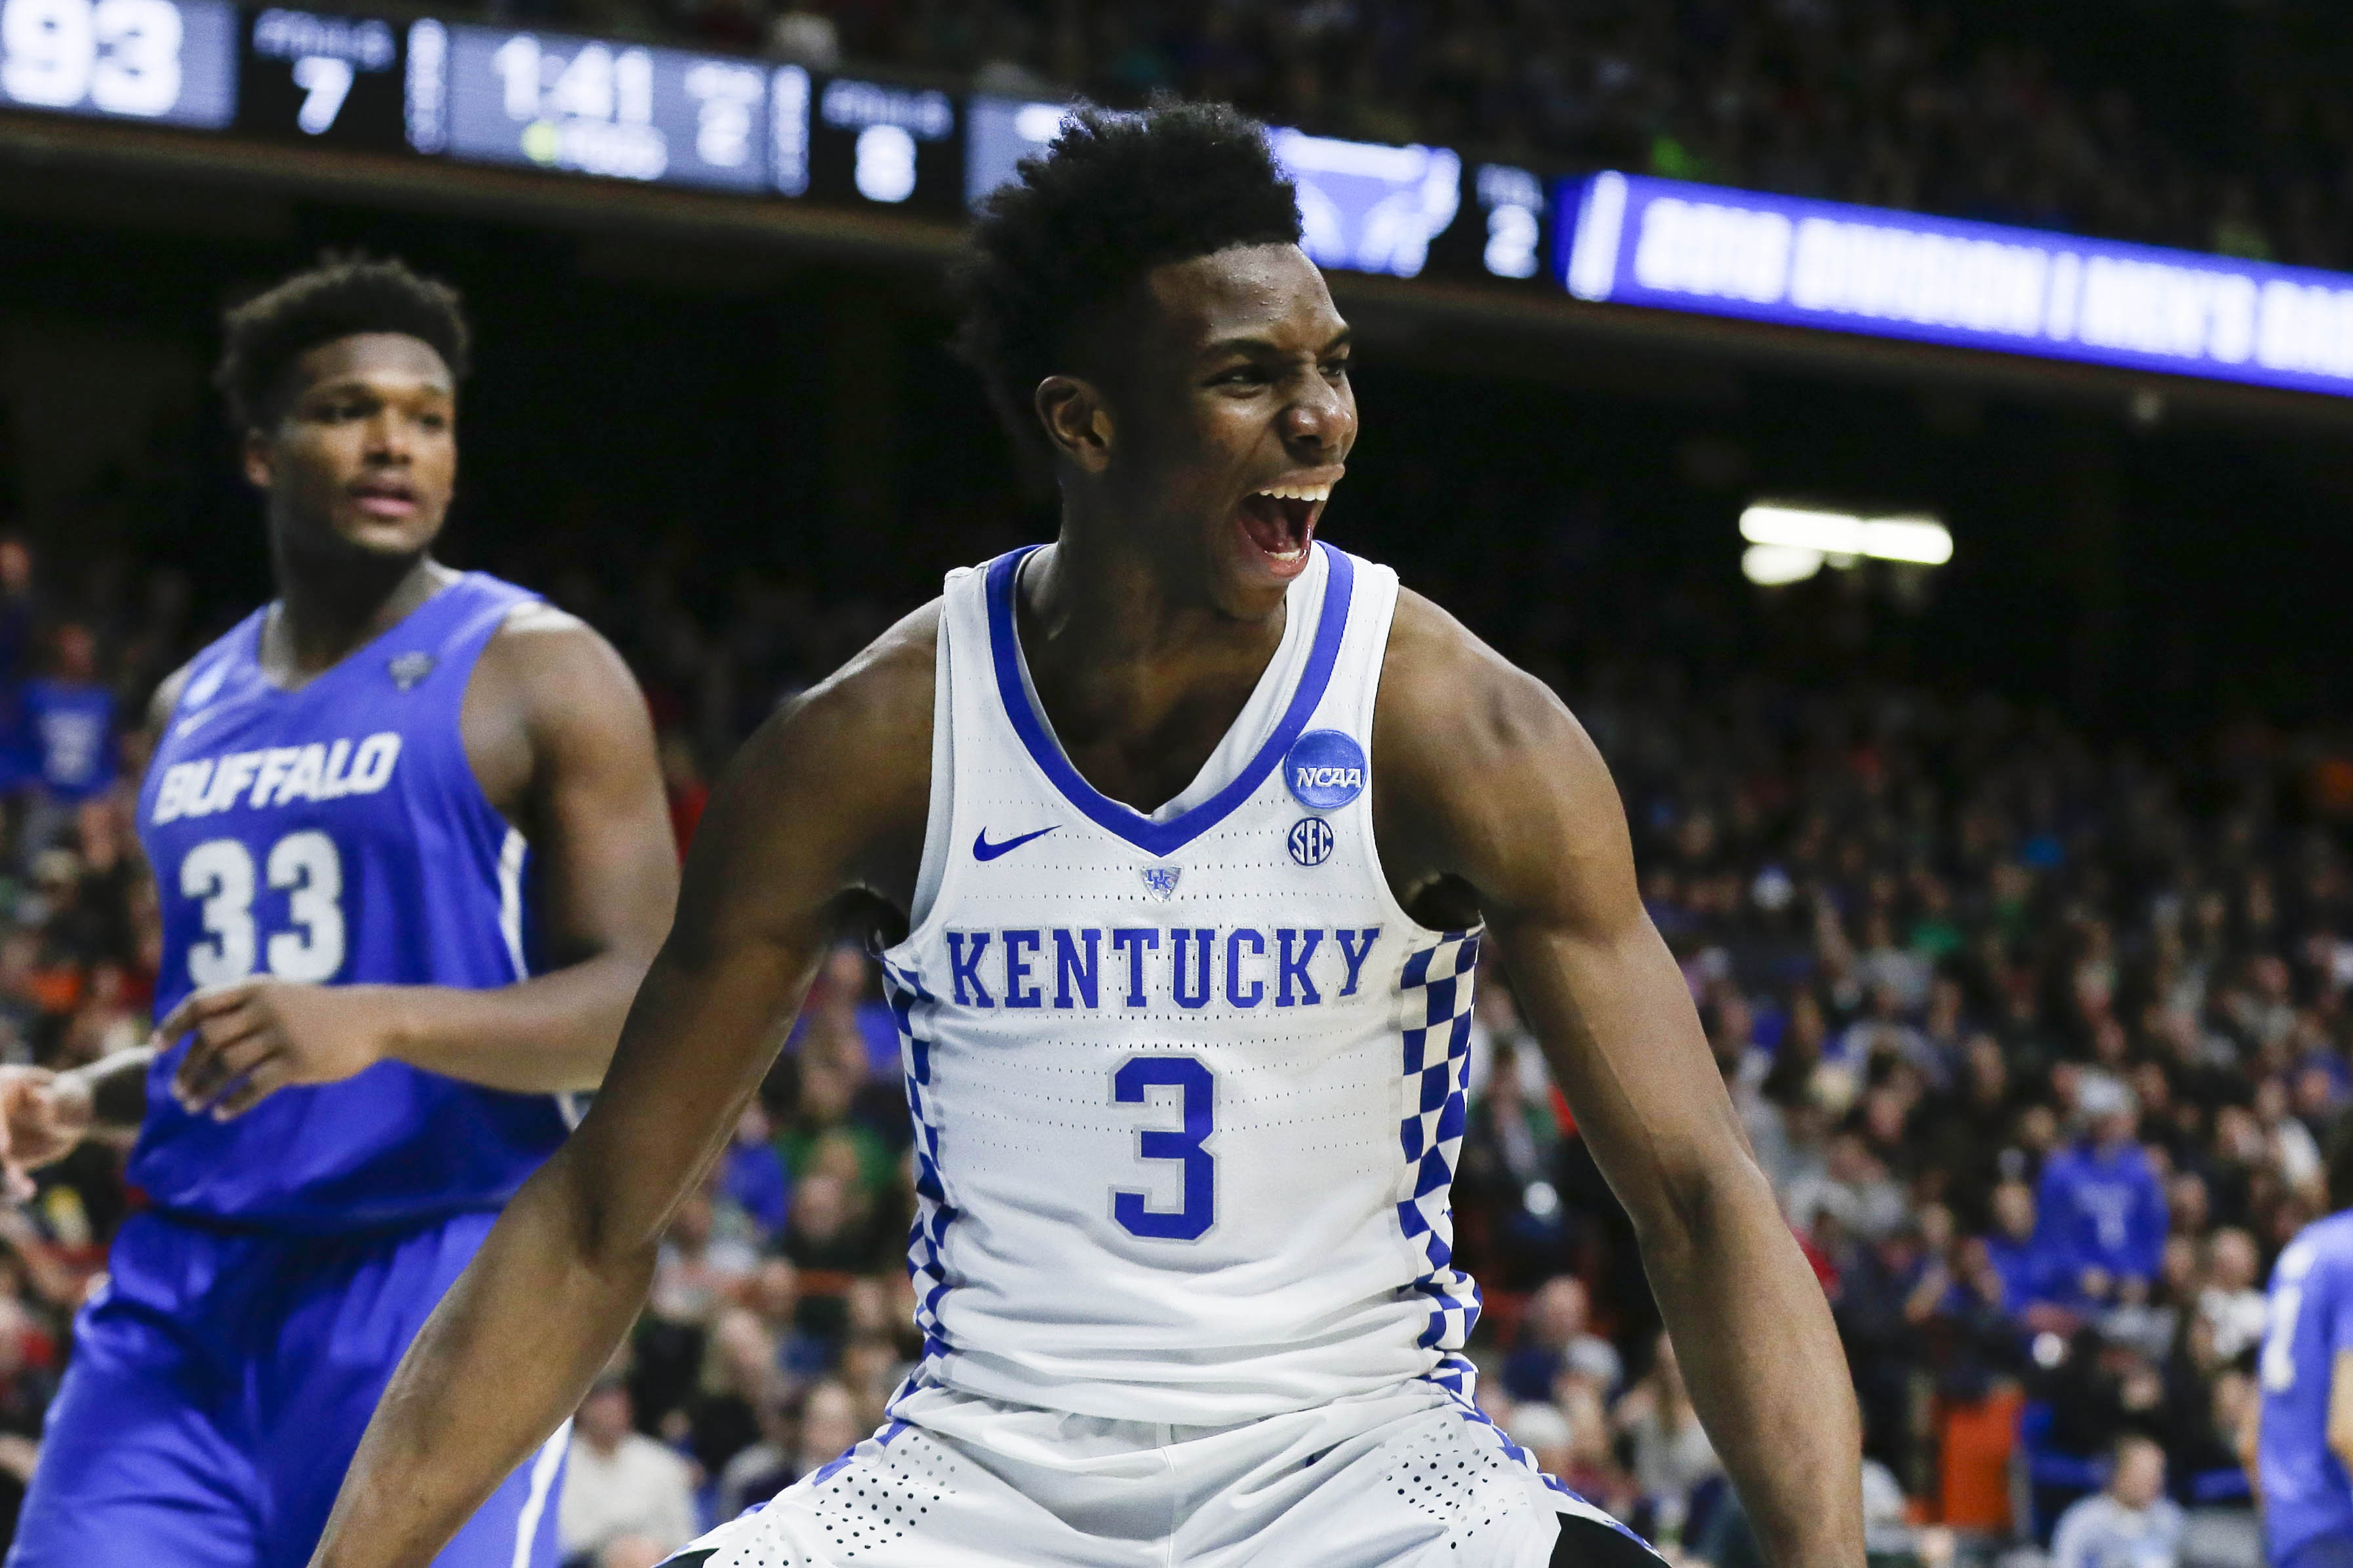 Not happening here: Kentucky stops Buffalo cold, 95-75